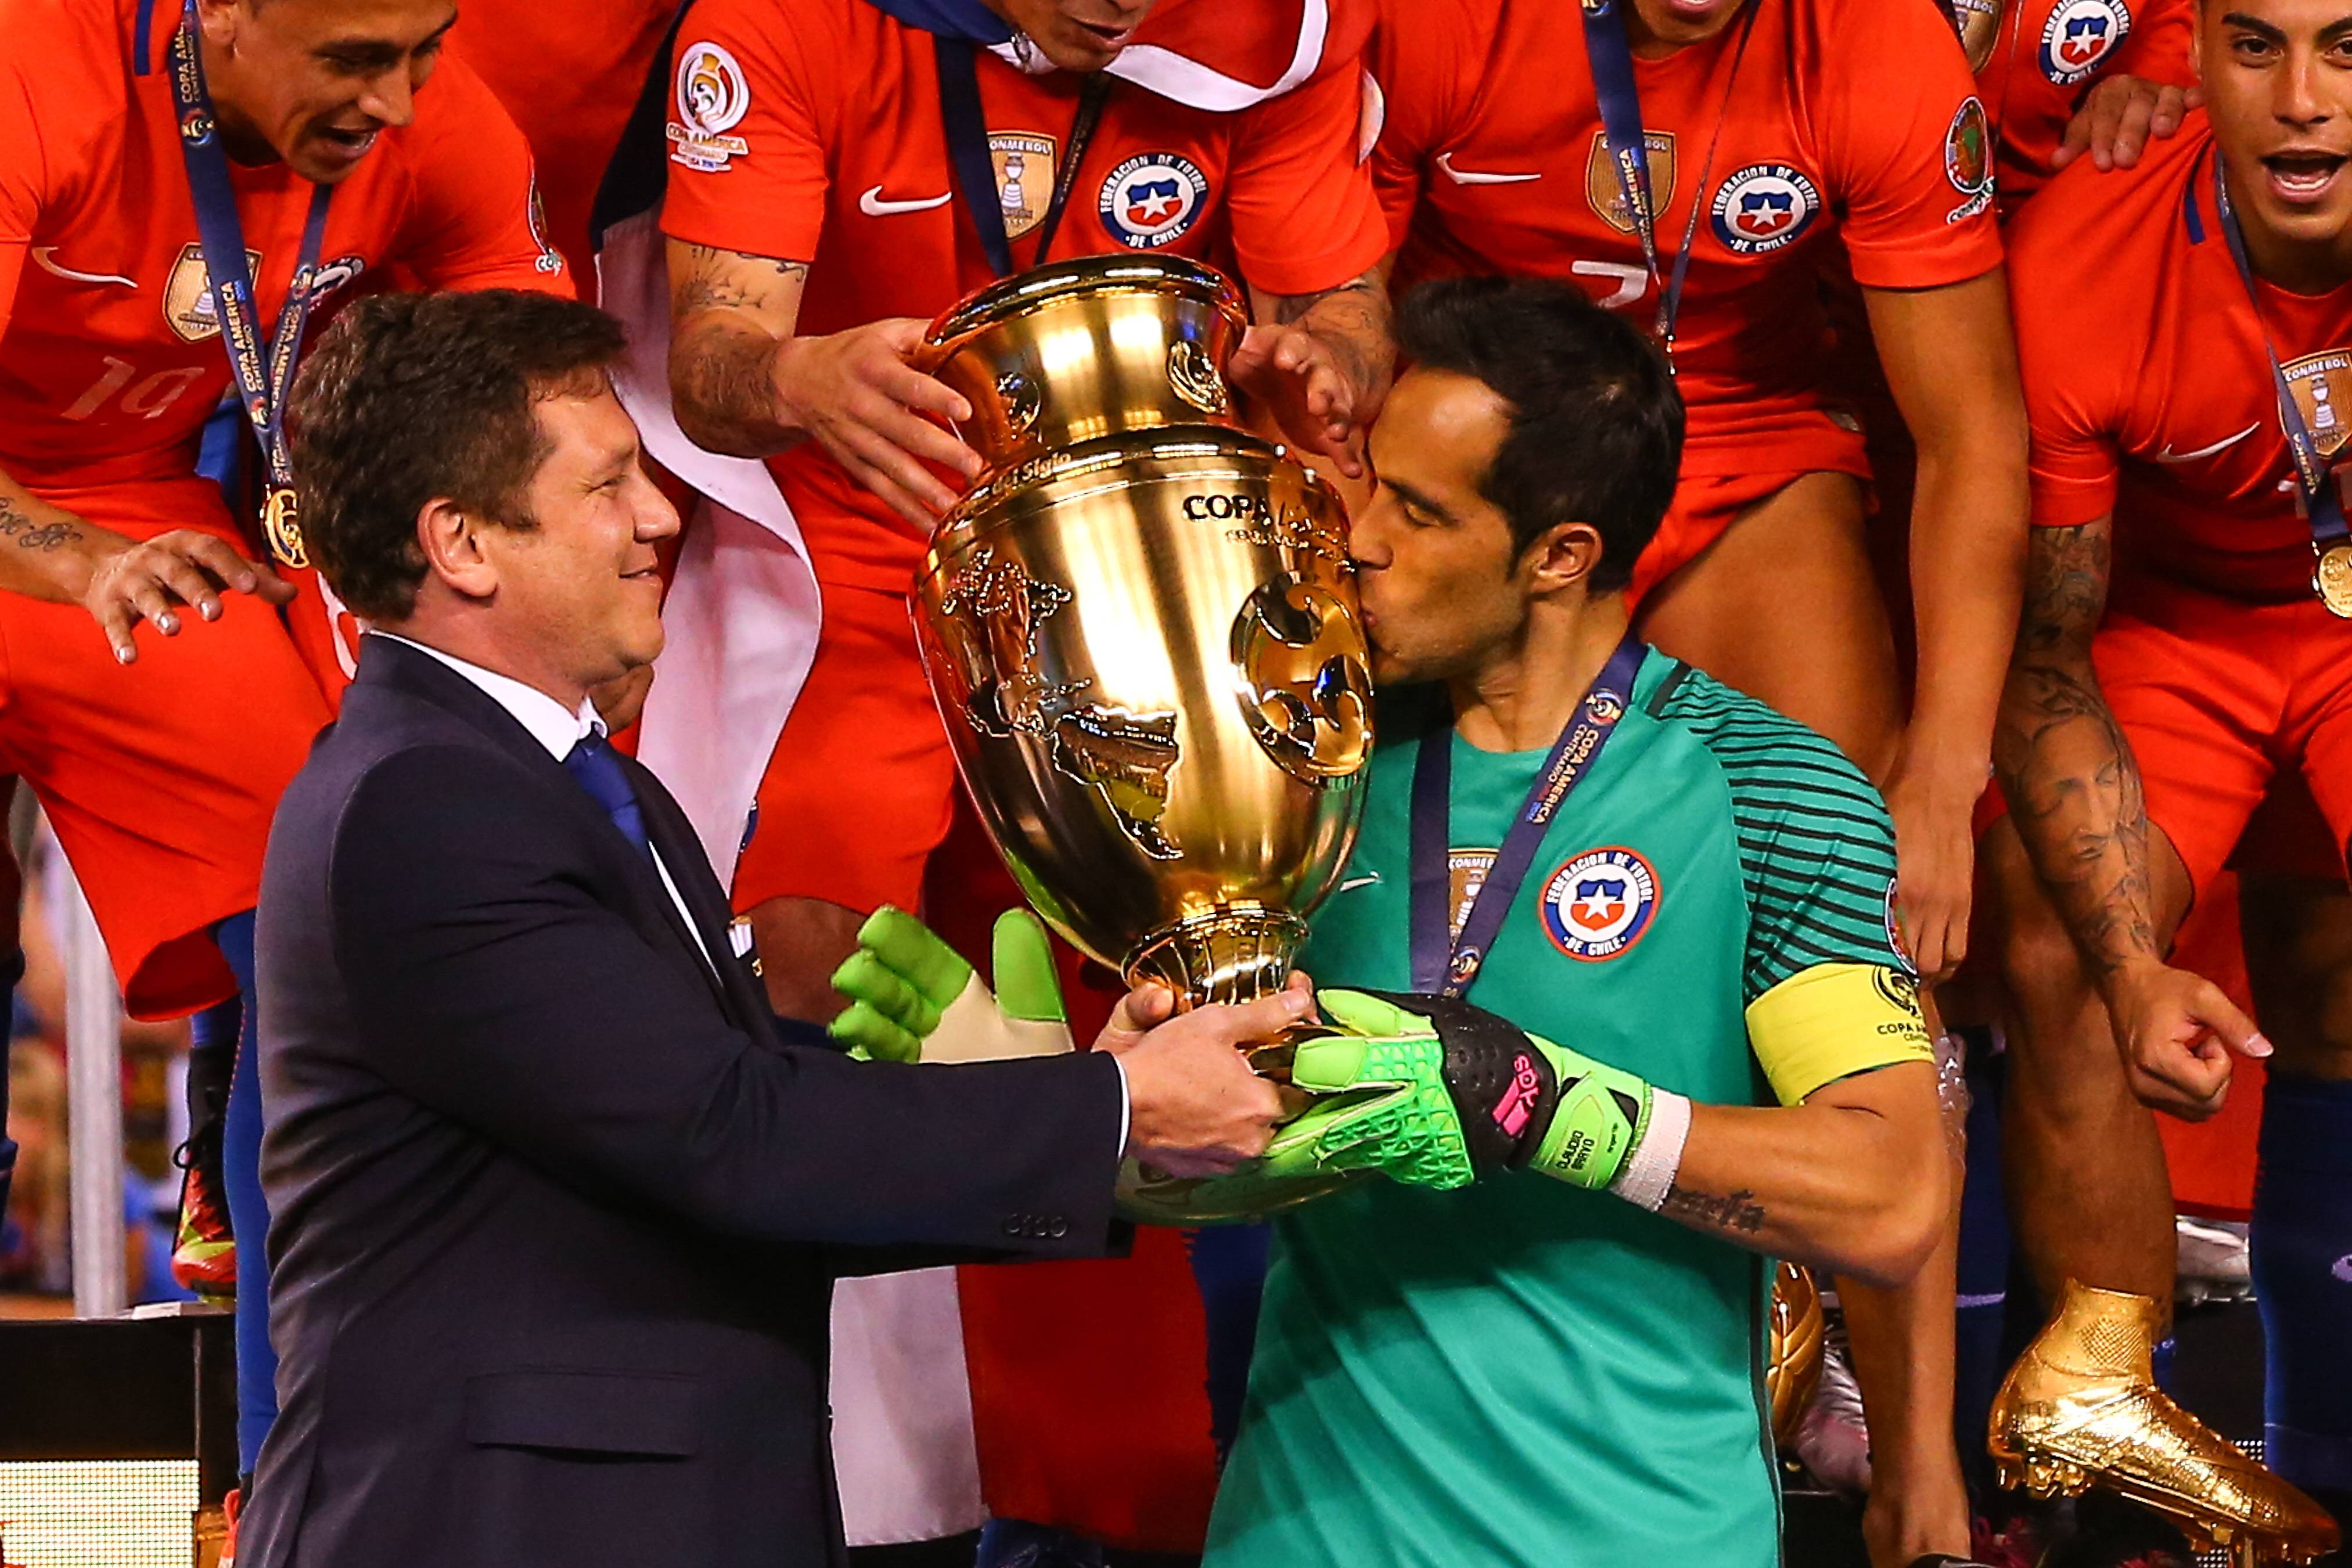 26 Jun 2016 Chile Goalkeeper Claudio Bravo 1 Kisses The Copa America Trophy After Winning The Cop